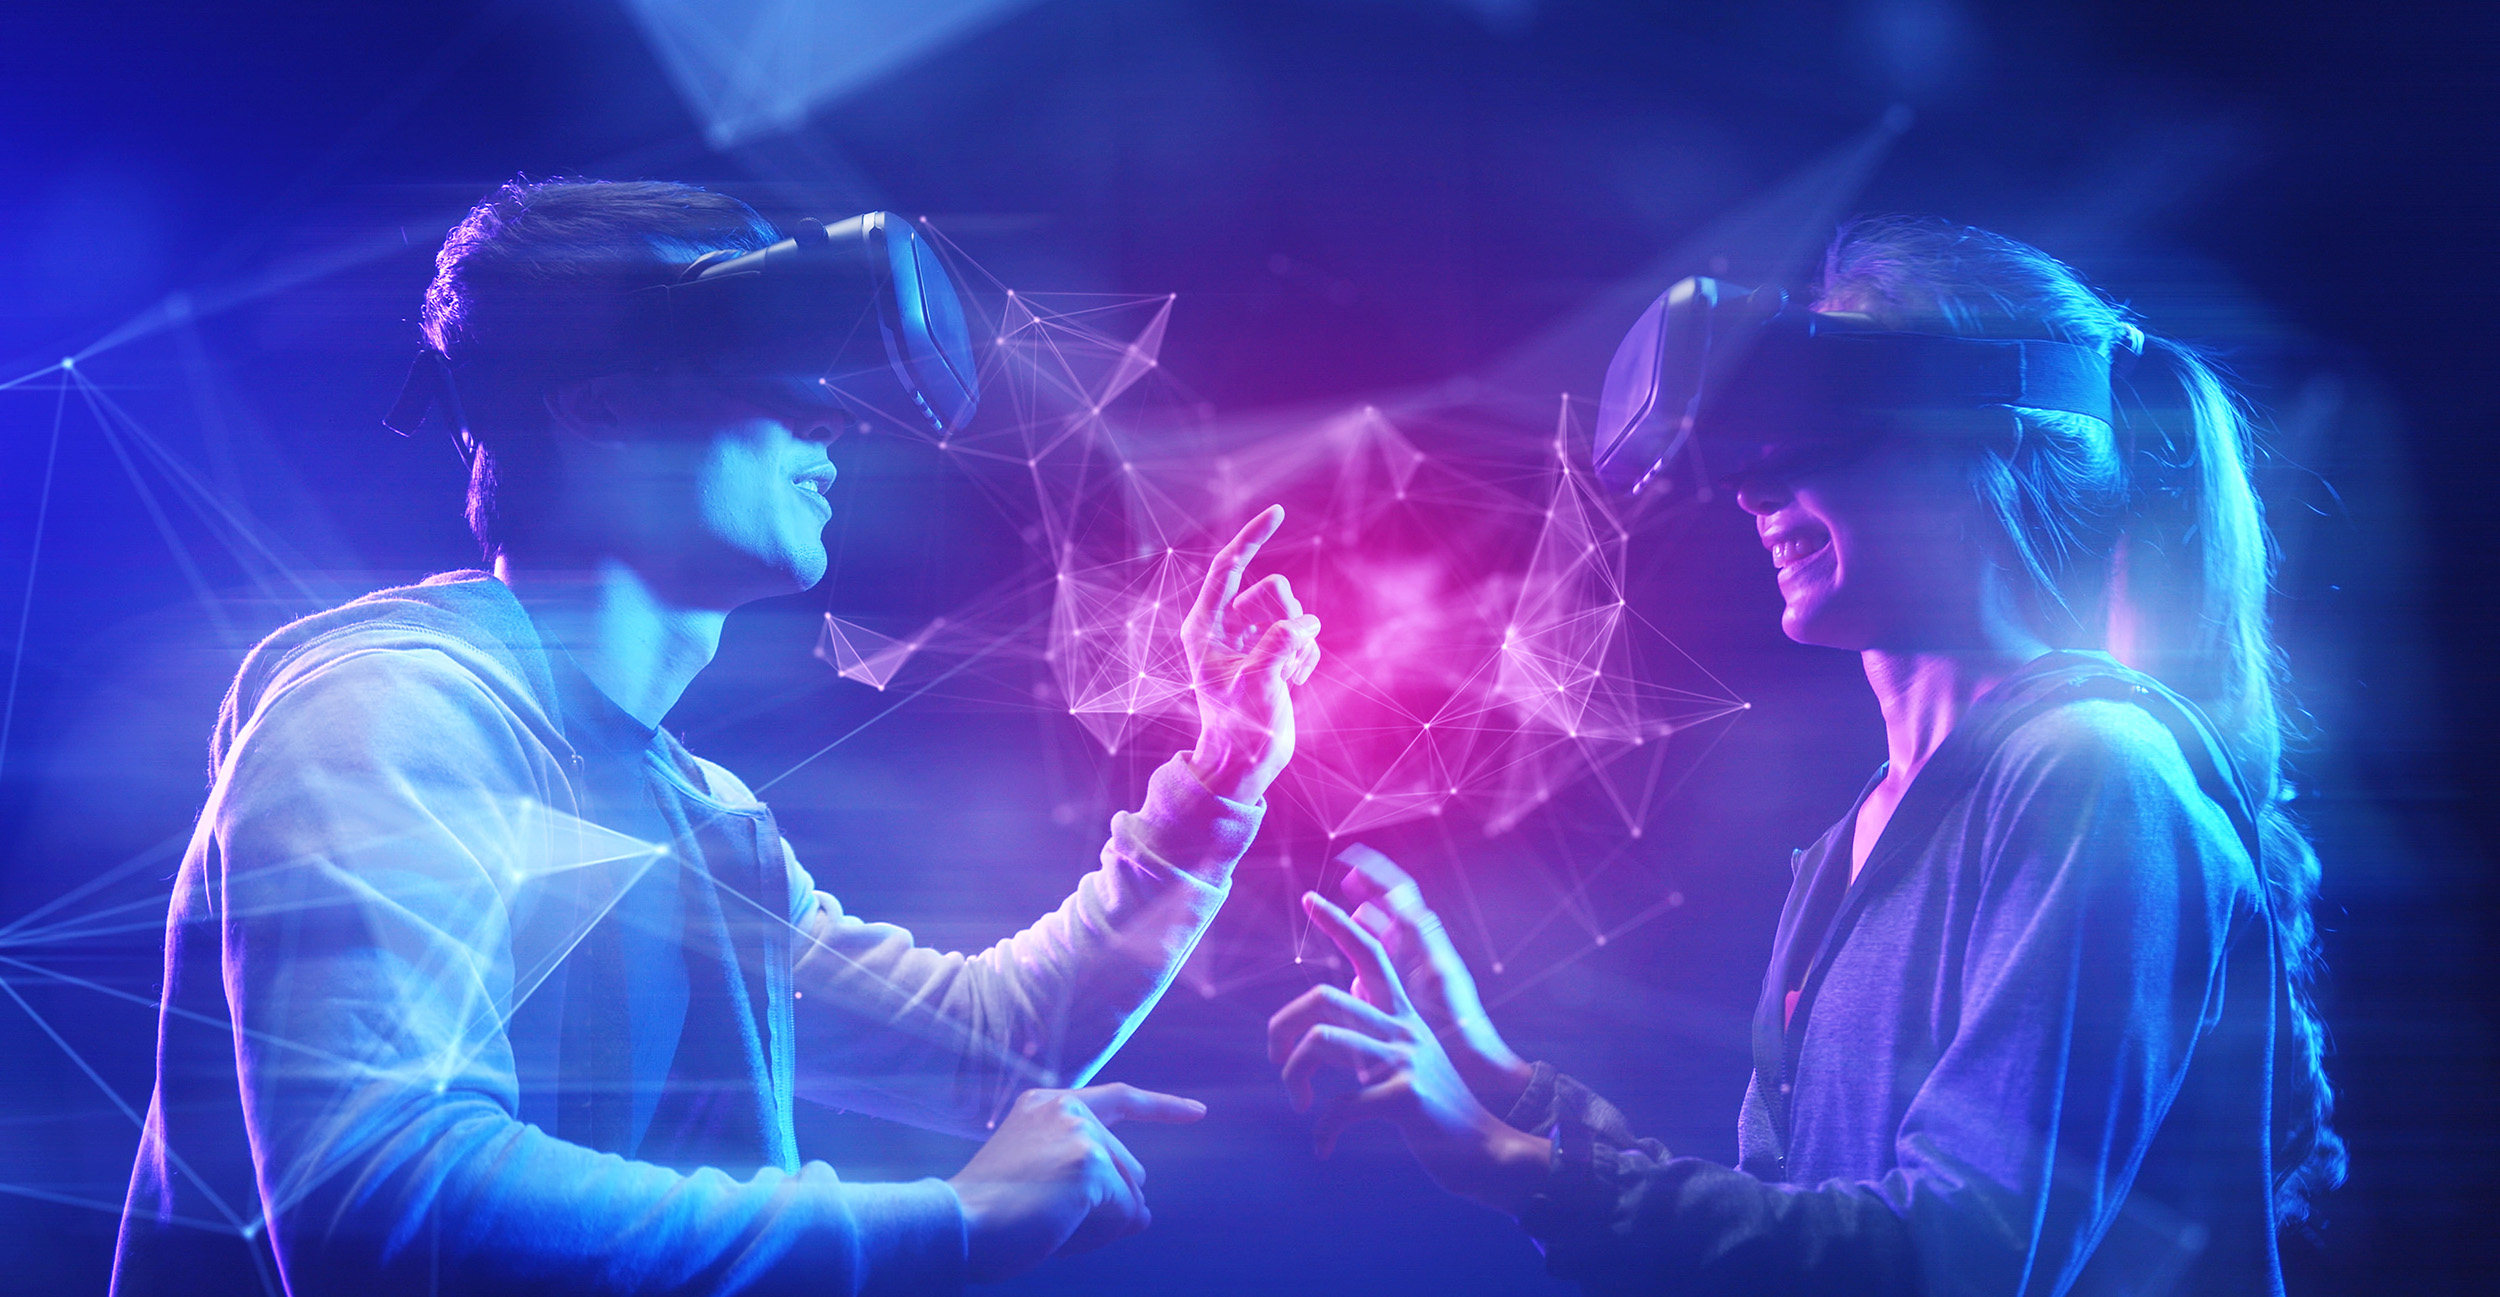 The rise of VR headsets is just one sign that virtual and physical worlds are coming together, but can the luxury industry take advantage of the coming metaverse marketplace?
Photo: Shutterstock